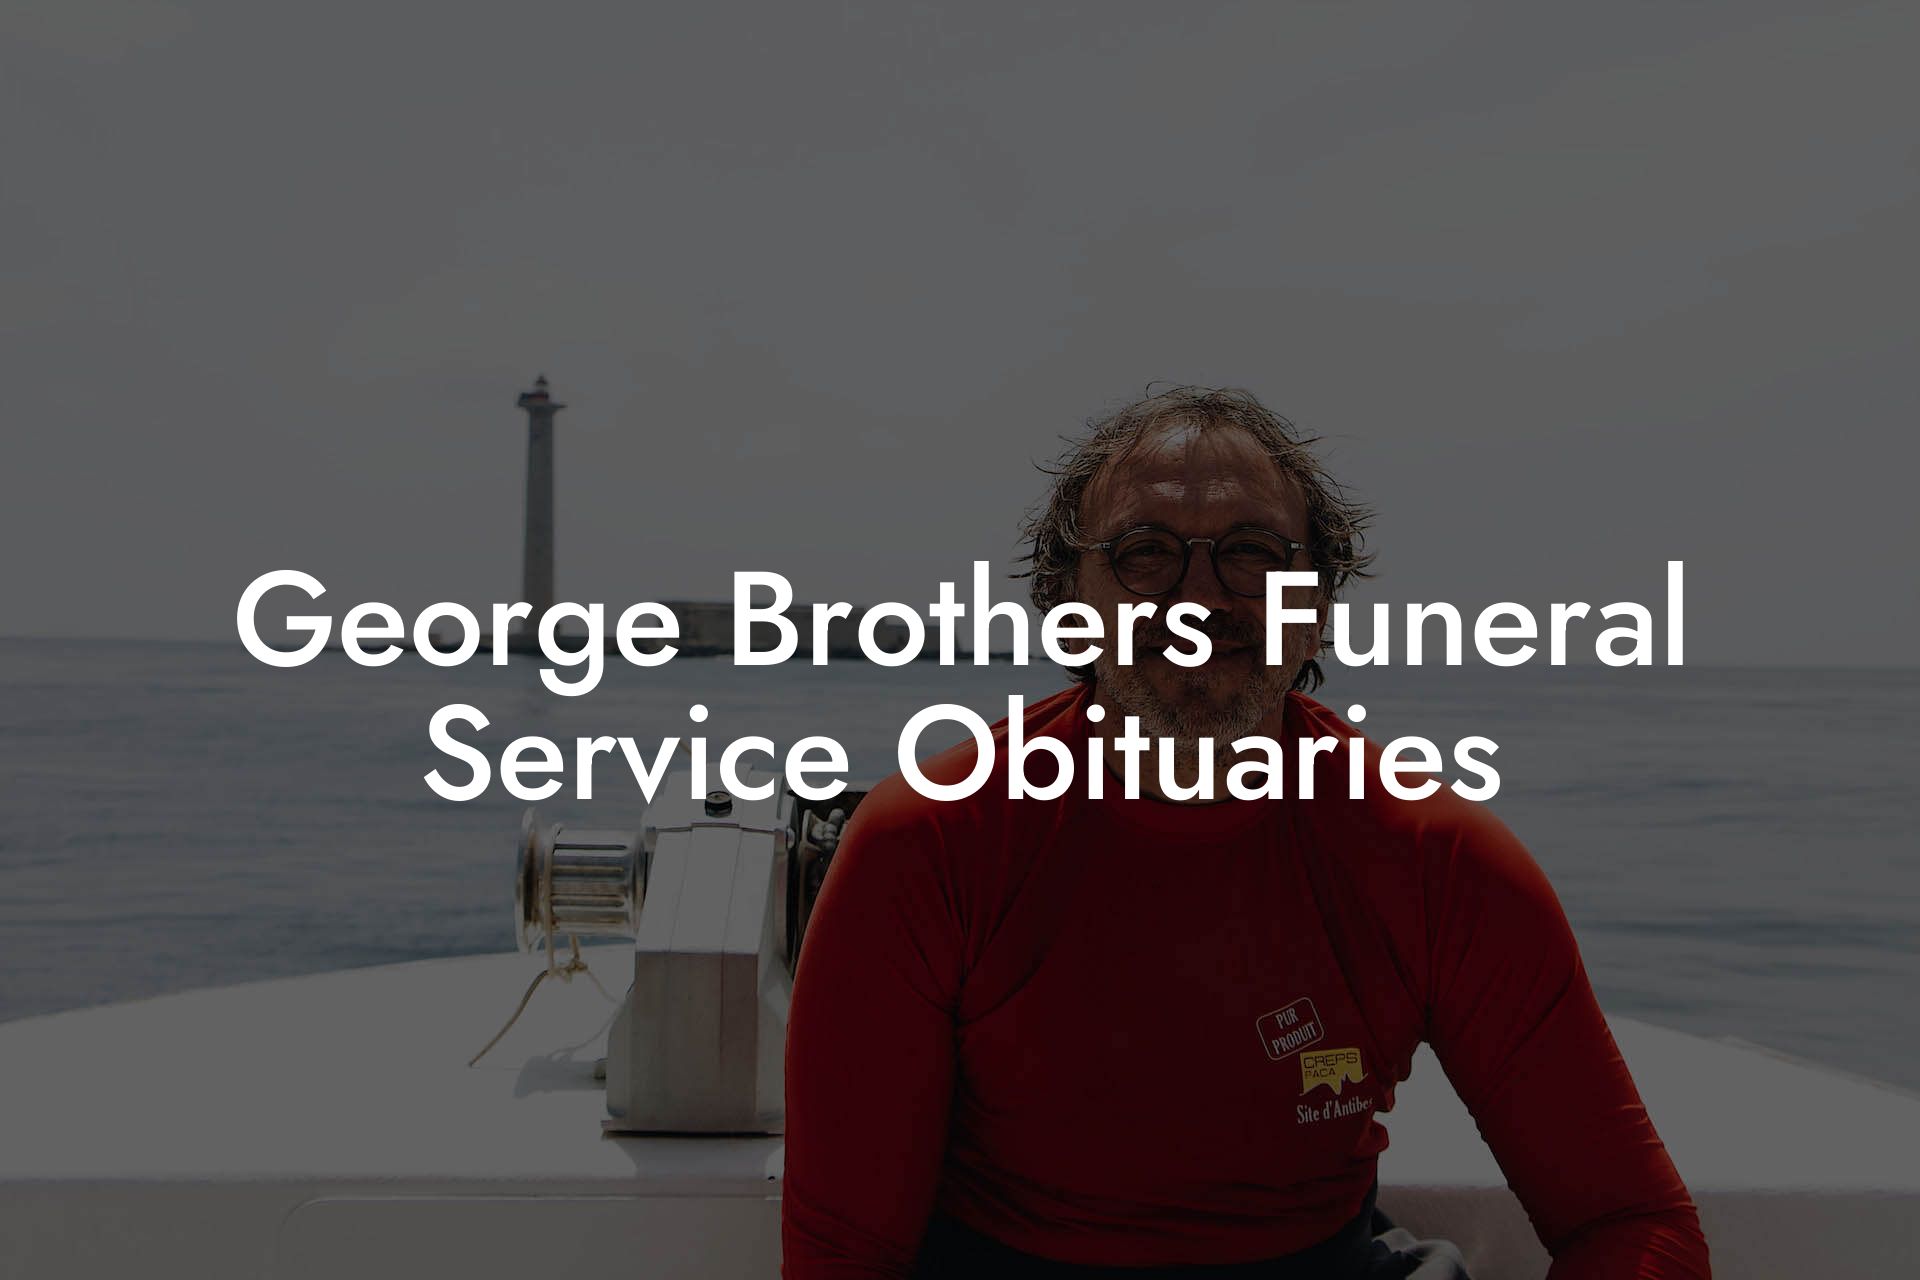 George Brothers Funeral Service Obituaries